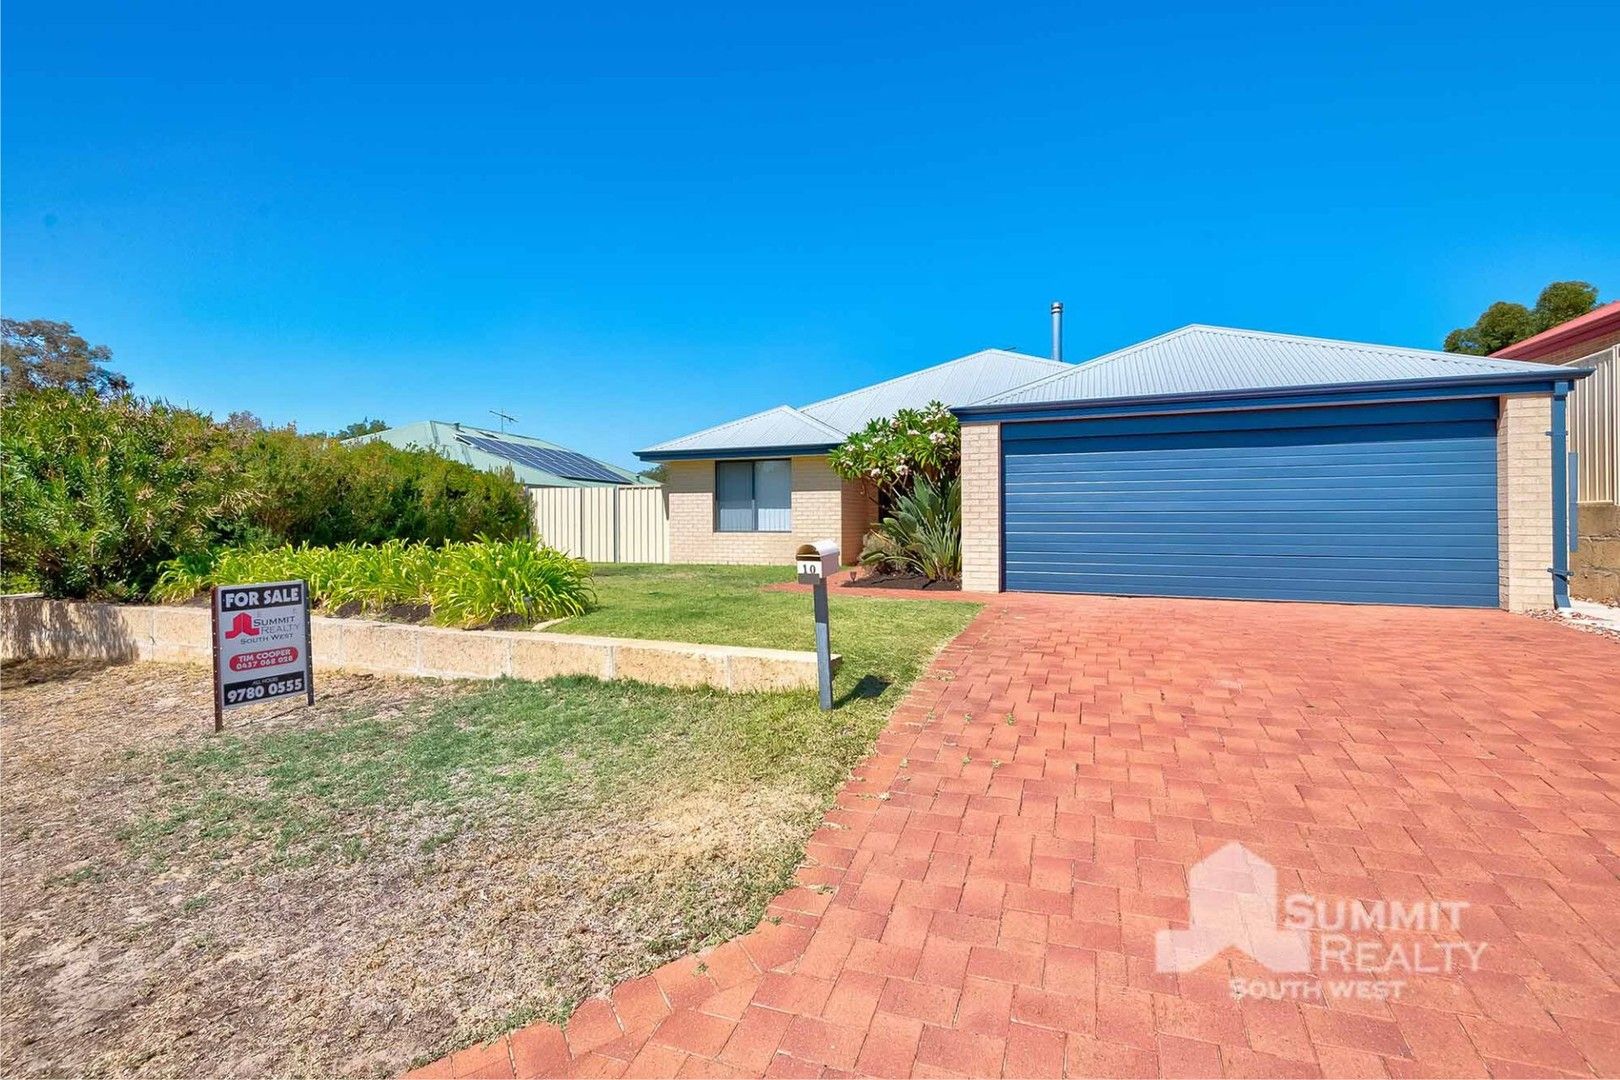 4 bedrooms House in 10 Gale Court AUSTRALIND WA, 6233